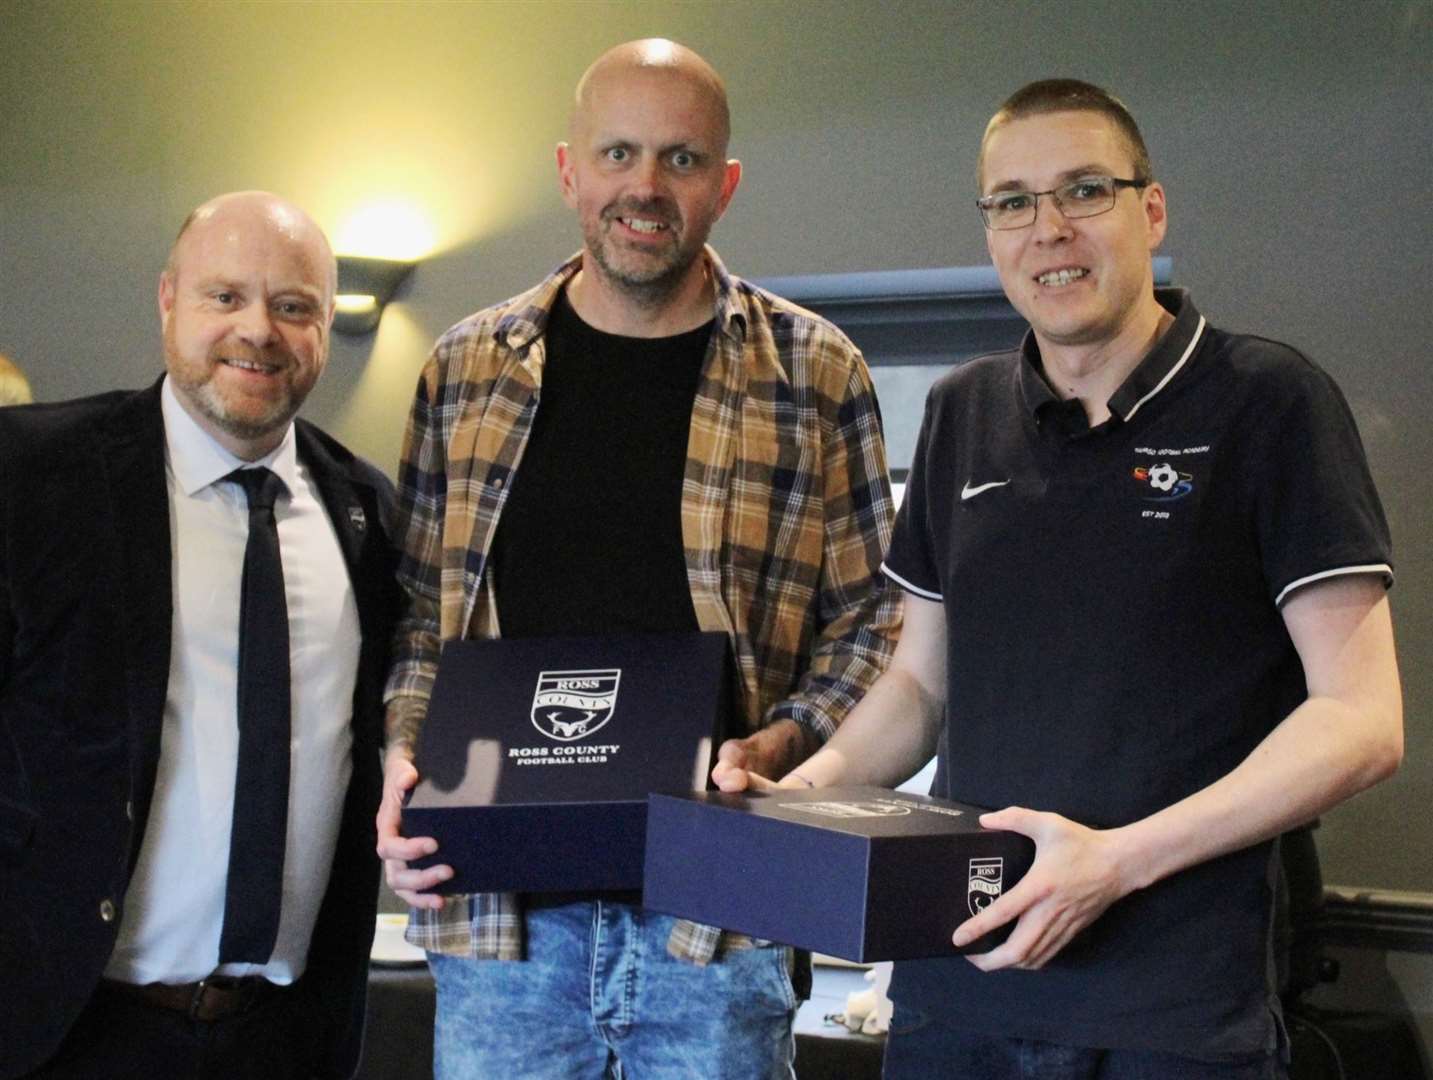 From left: Ross County chief executive Steven Ferguson with Thurso Football Academy's development officer Richie Campbell and head of coaching Alyn Gunn.